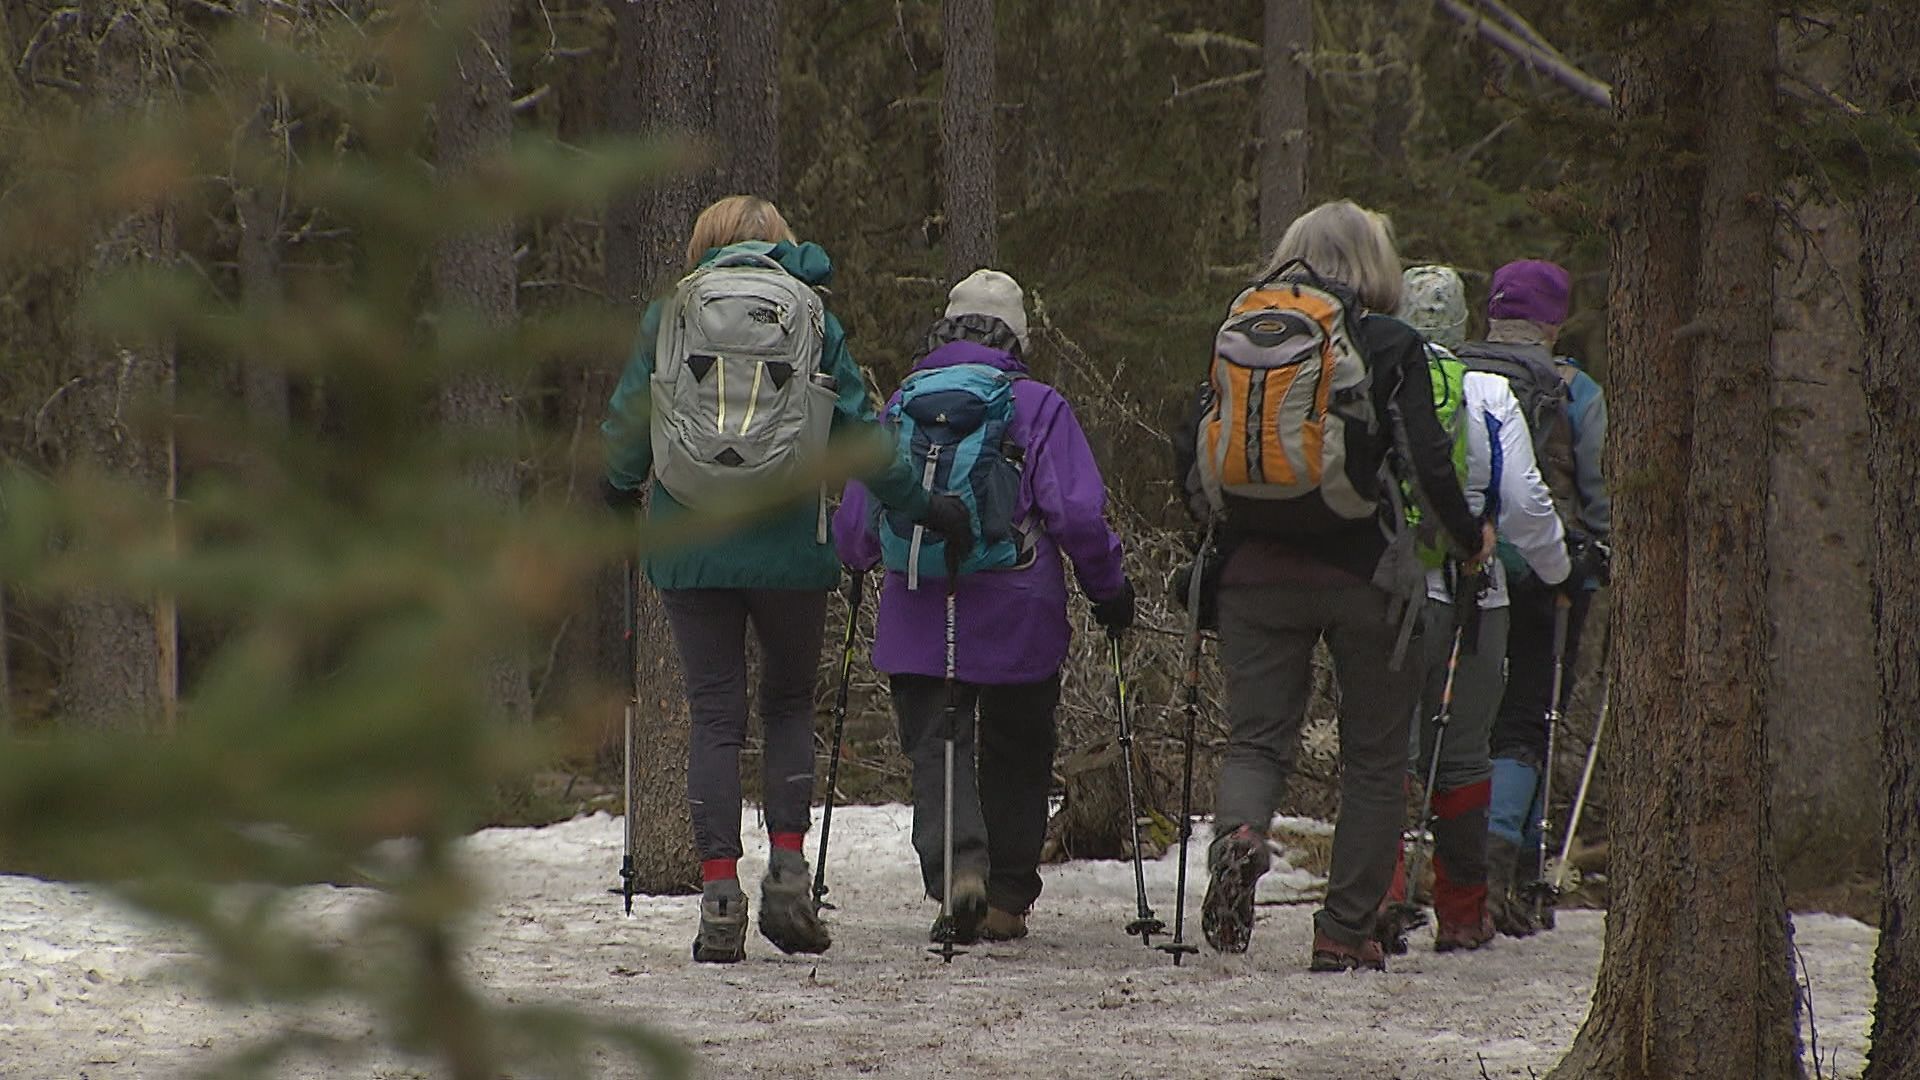 Albertans concerned about disappearing hiking trails near Calgary due to planned logging